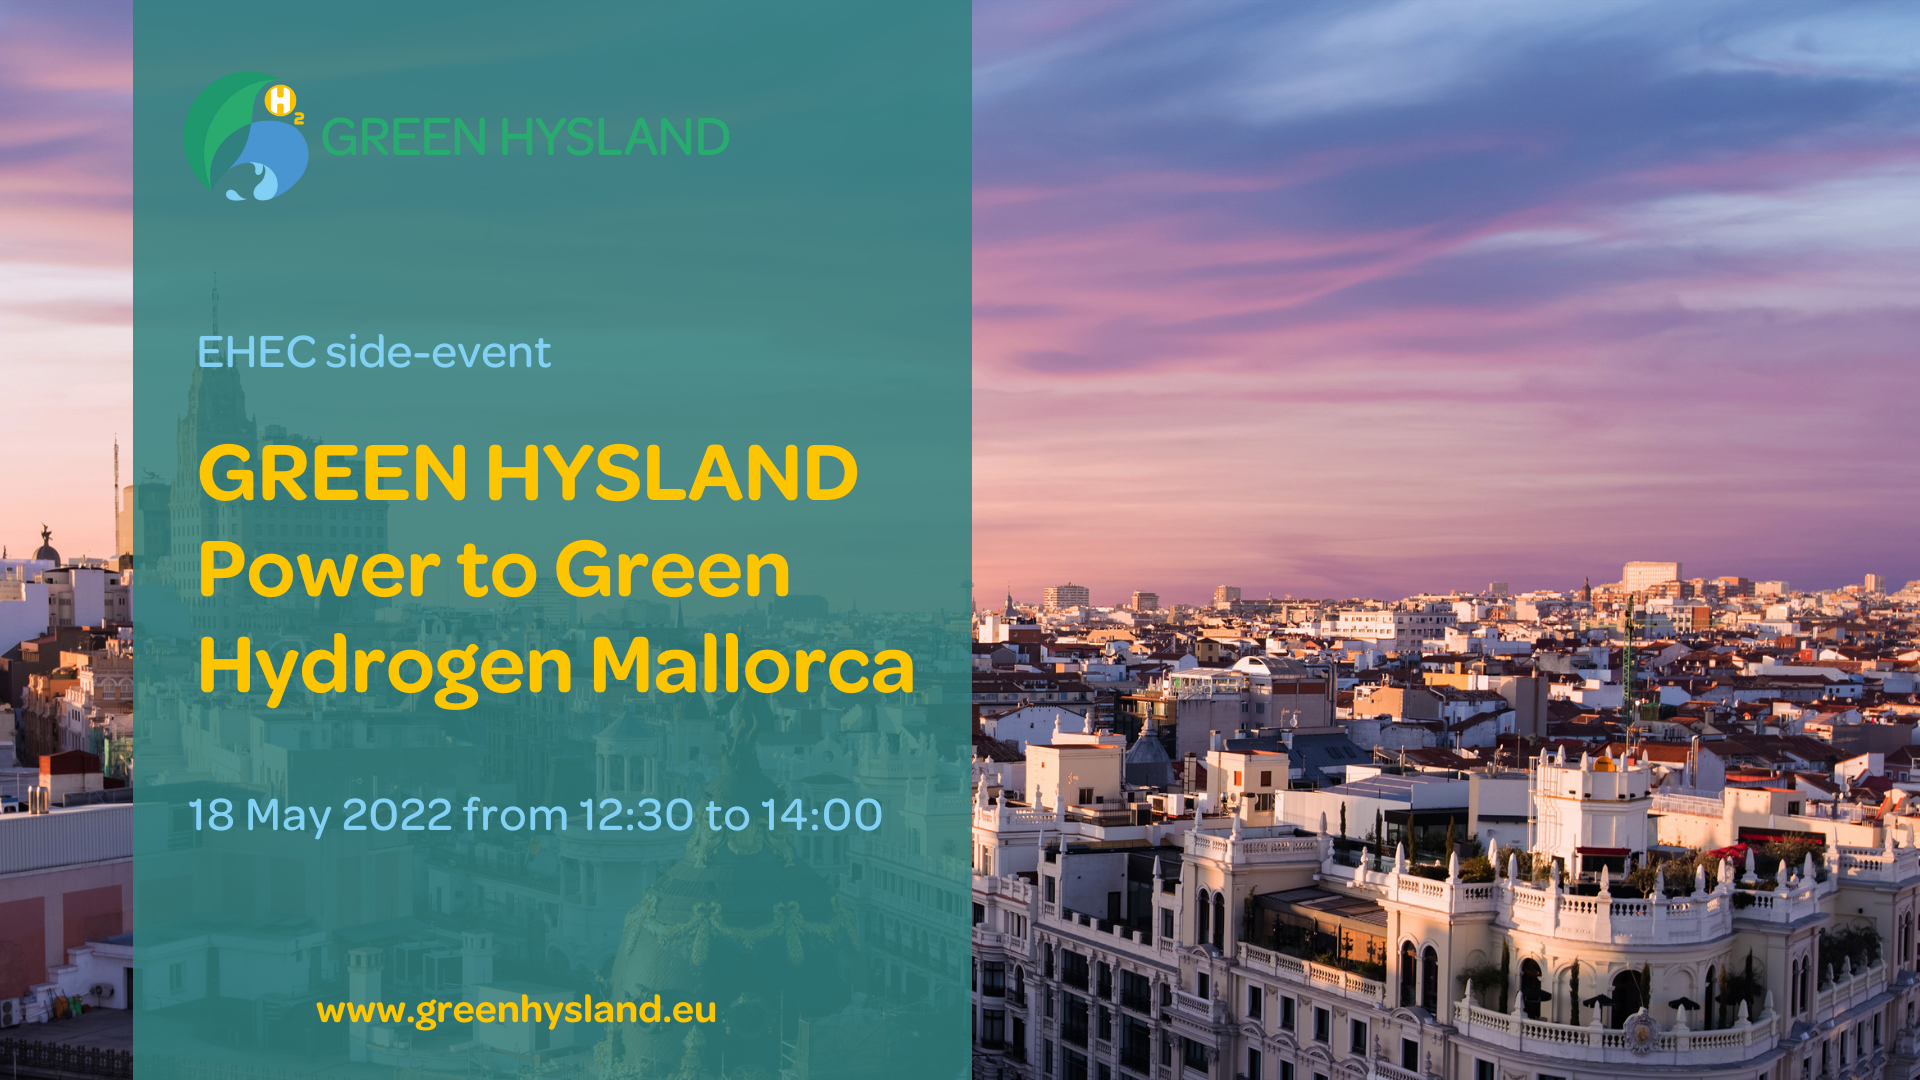 Green Hysland at the European Hydrogen Energy Conference 2022